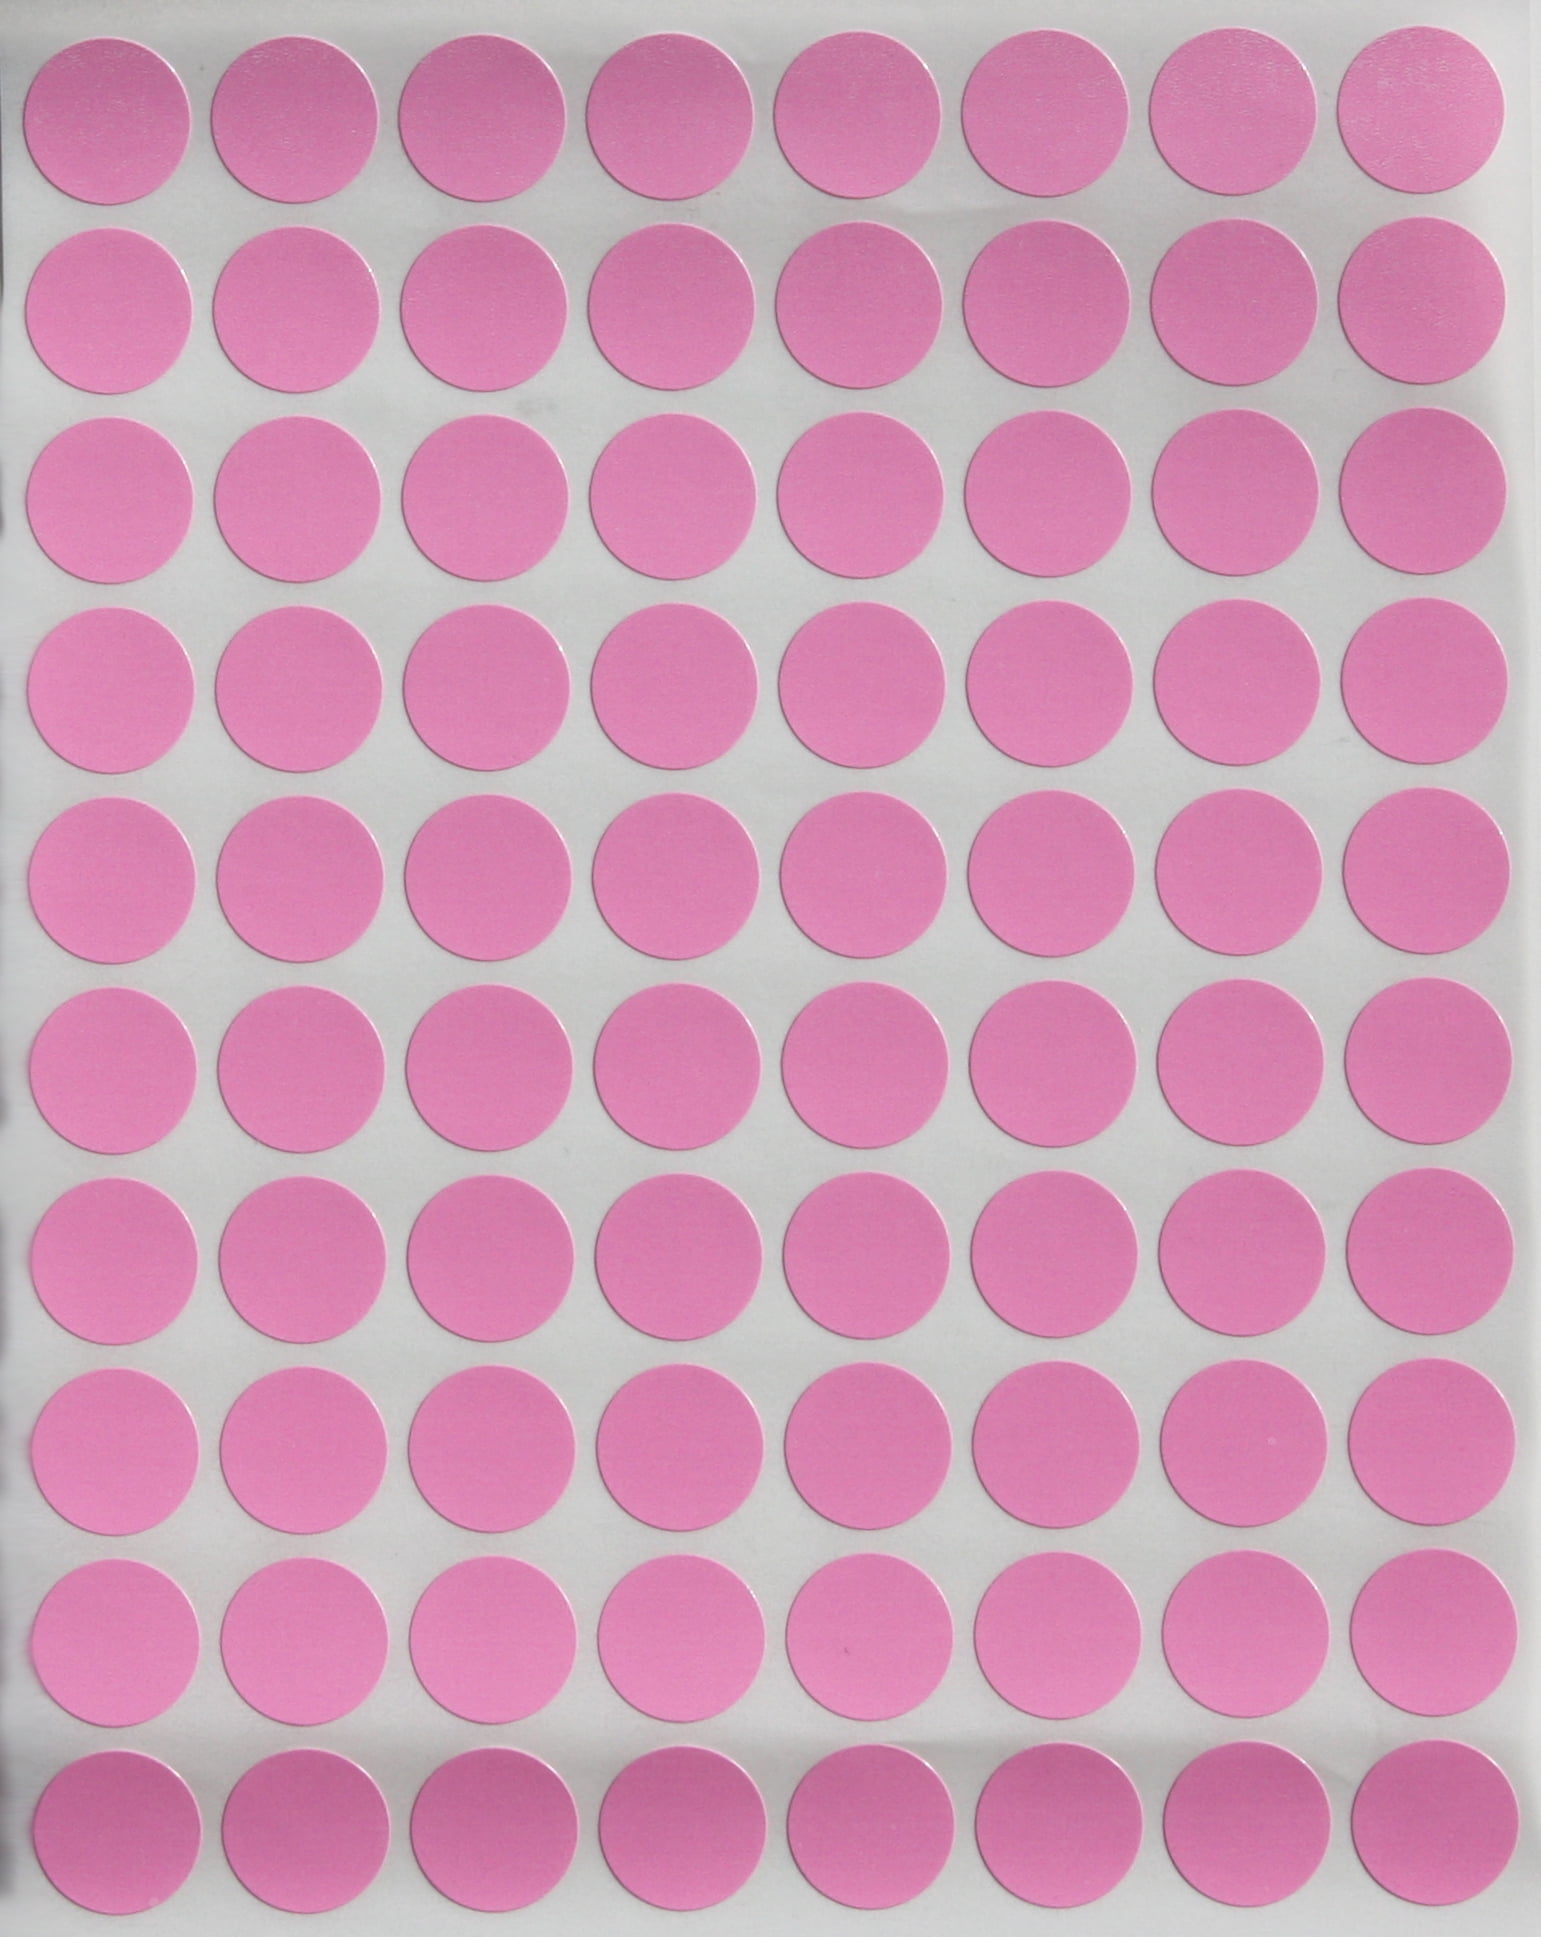 Colour Code Dots Round Stickers Sticky ID Labels 1/2 Inch 500 Dark Pink 15mm 